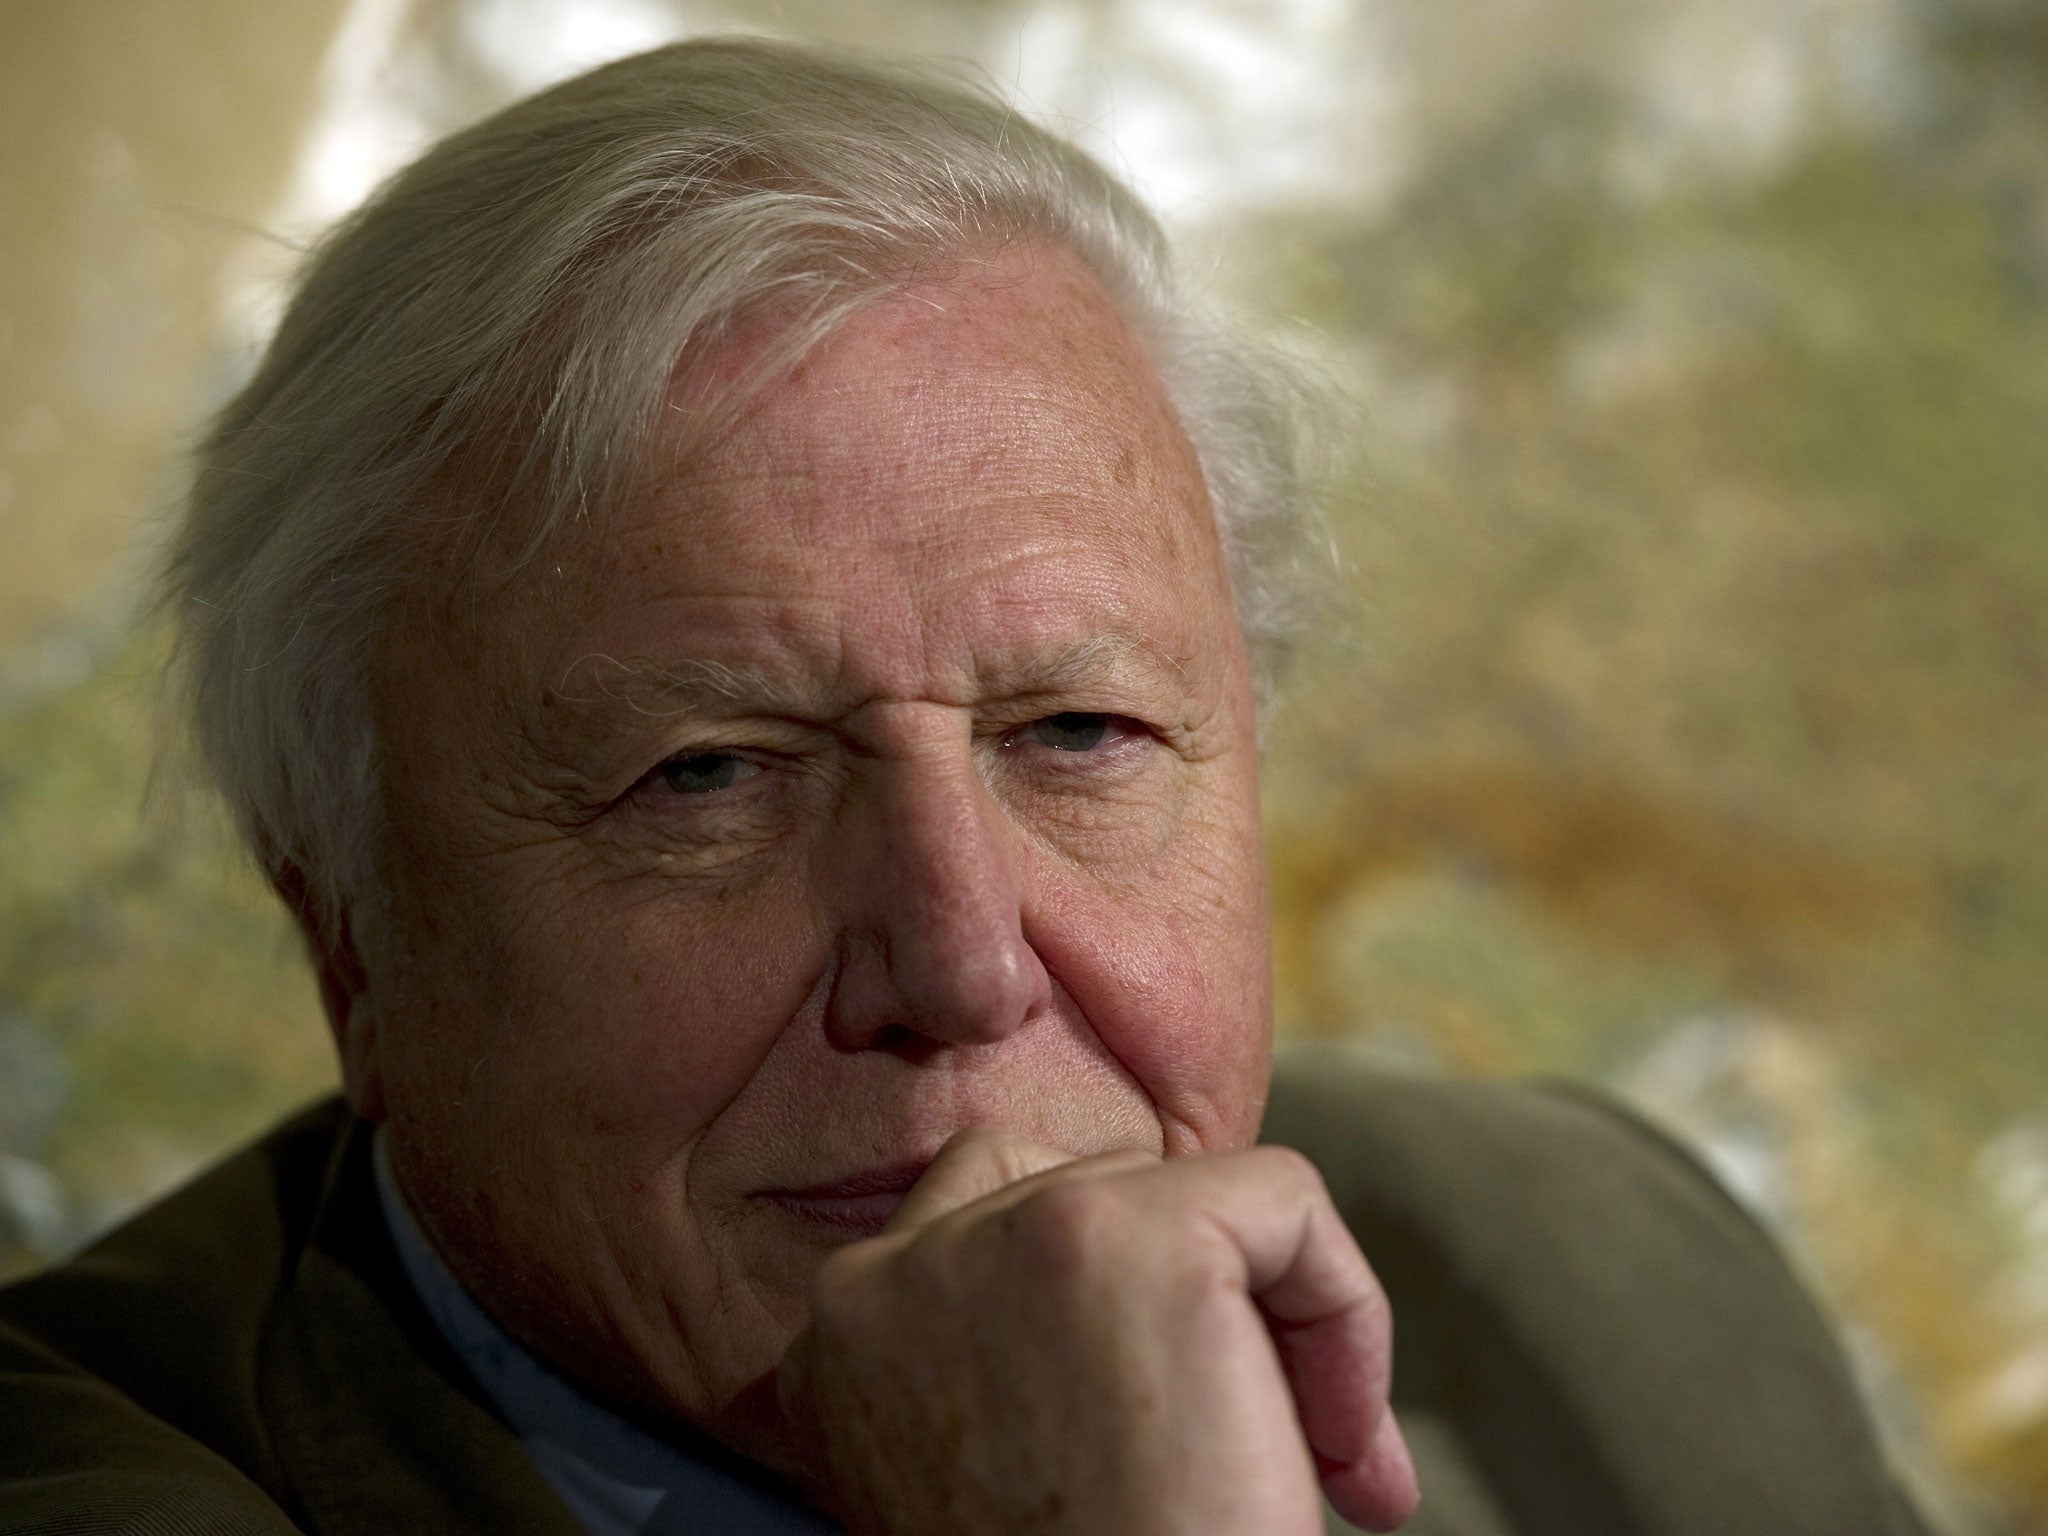 Sir Attenborough is steadfastly committed to progressive gender politics